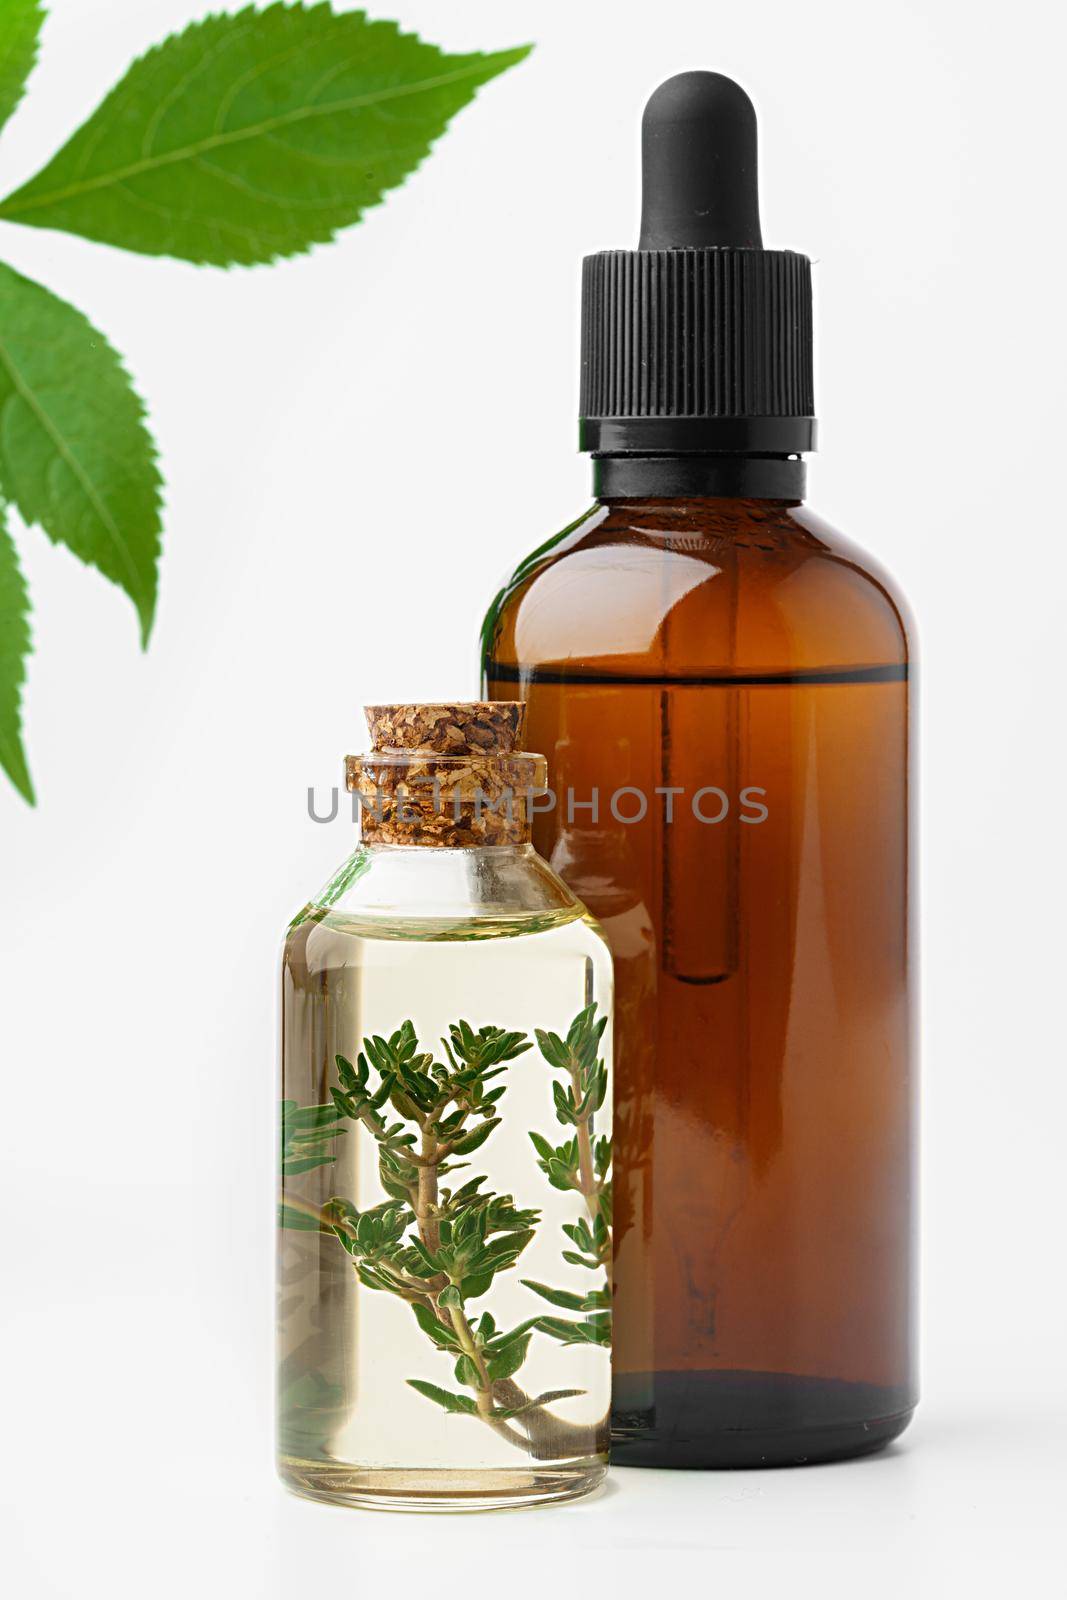 Essential oil in a small bottle with green leaf on white background, close up